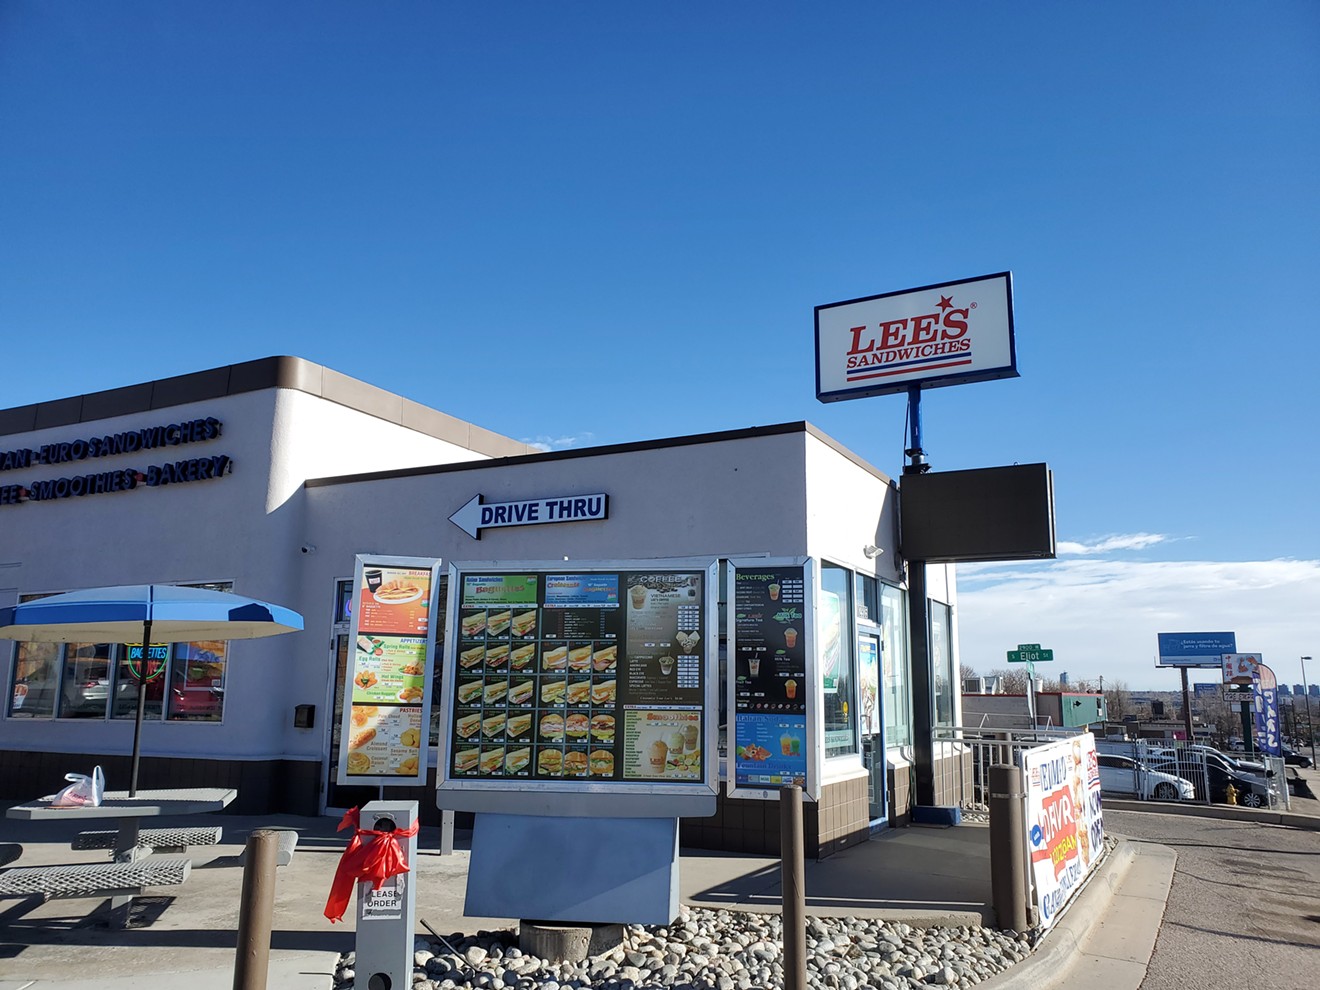 The new Lee's Sandwiches on Alameda and Federal has a drive thru.